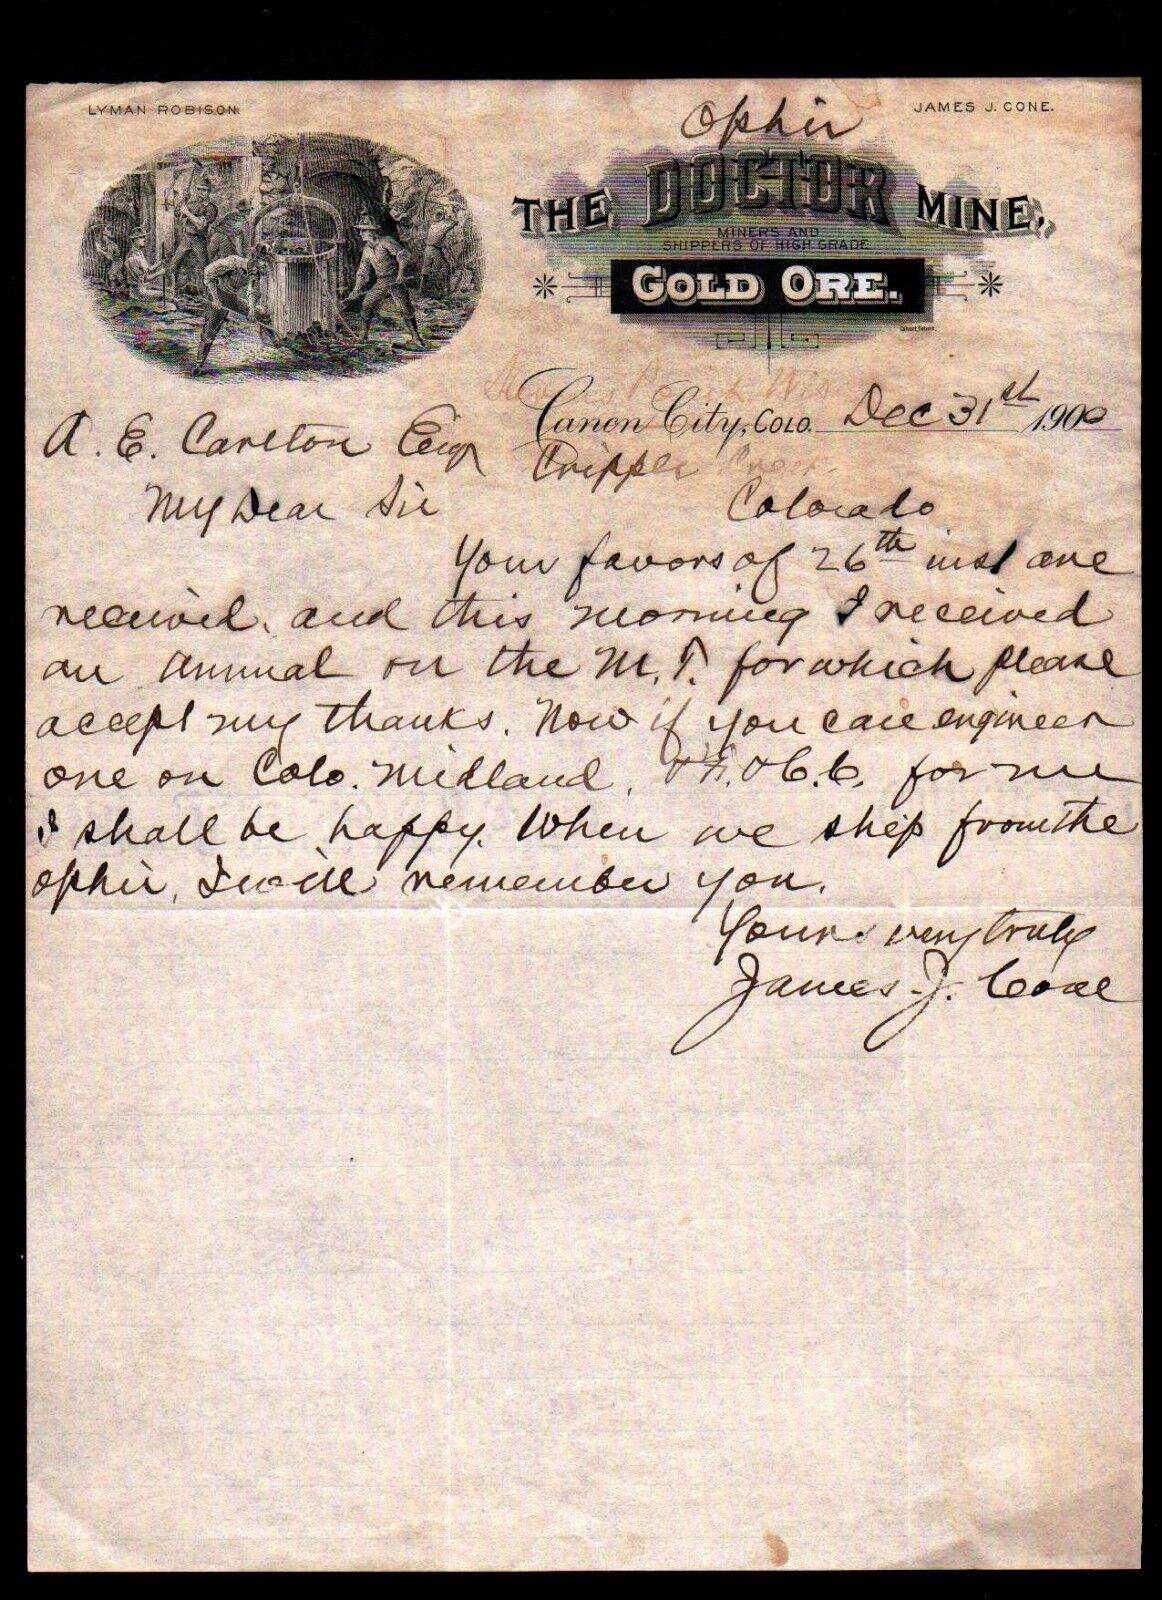 Canon City Colorado 1900 Ophir - Doctor Gold  Mine SUPERB Letter Head Mining